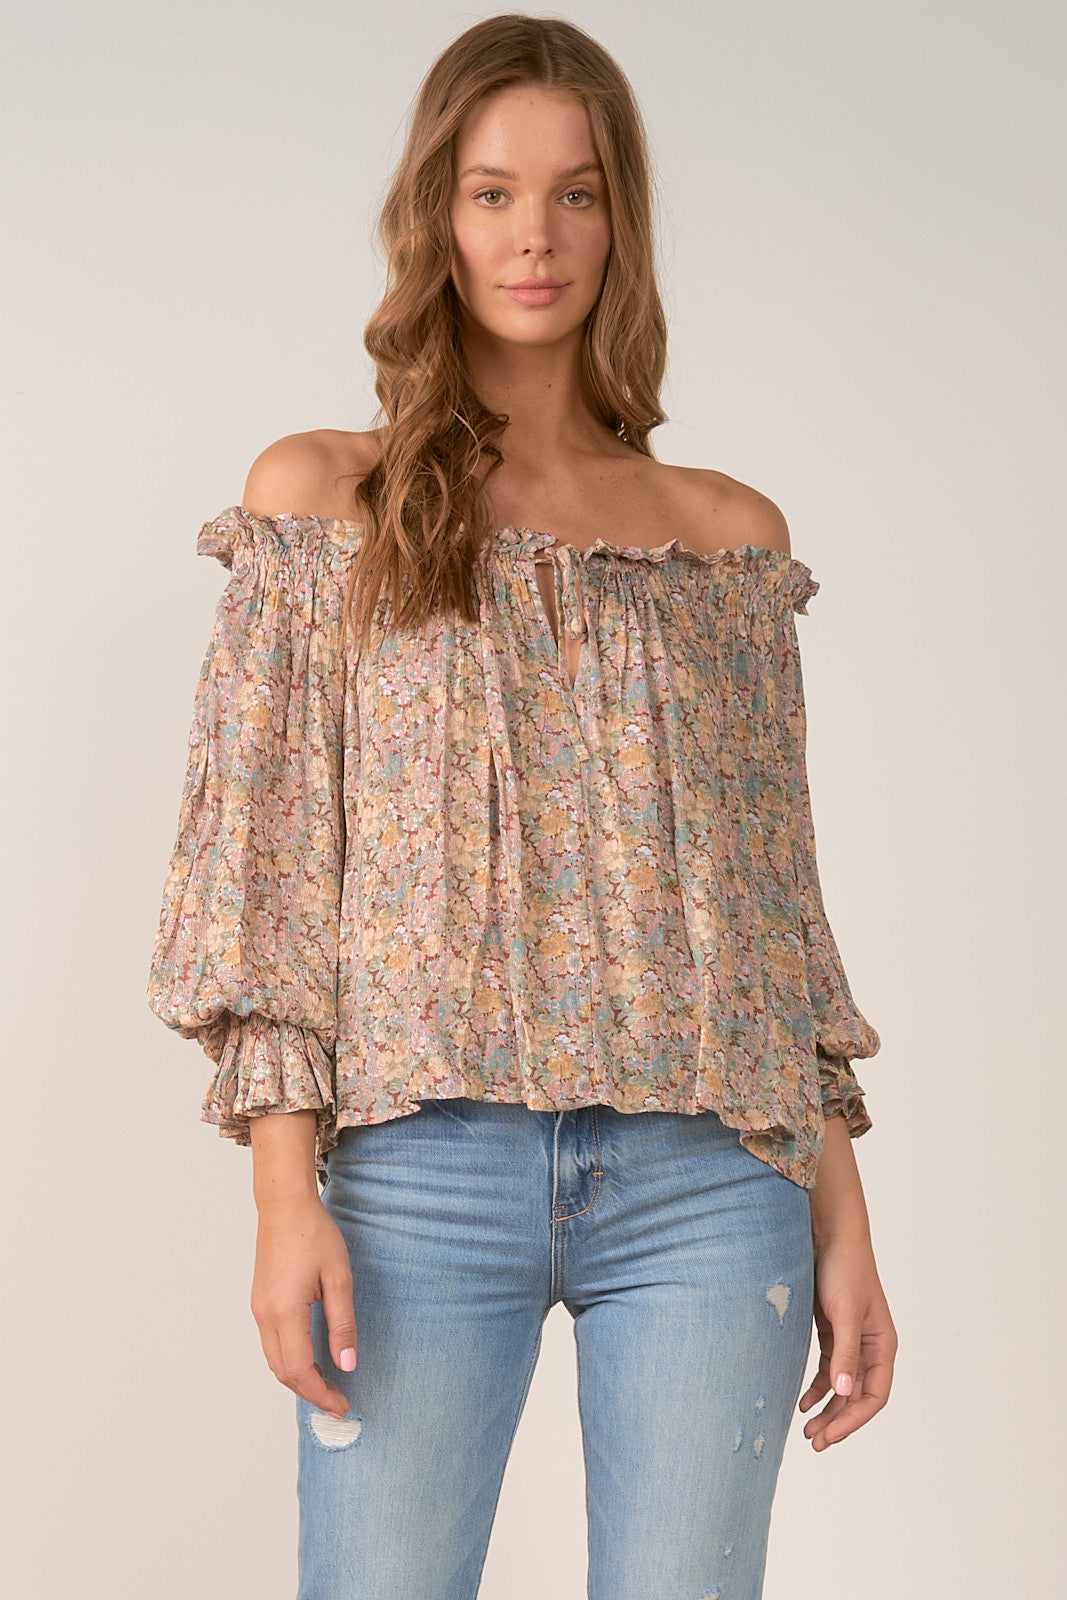 Off the Shoulder Dusty Rose Top